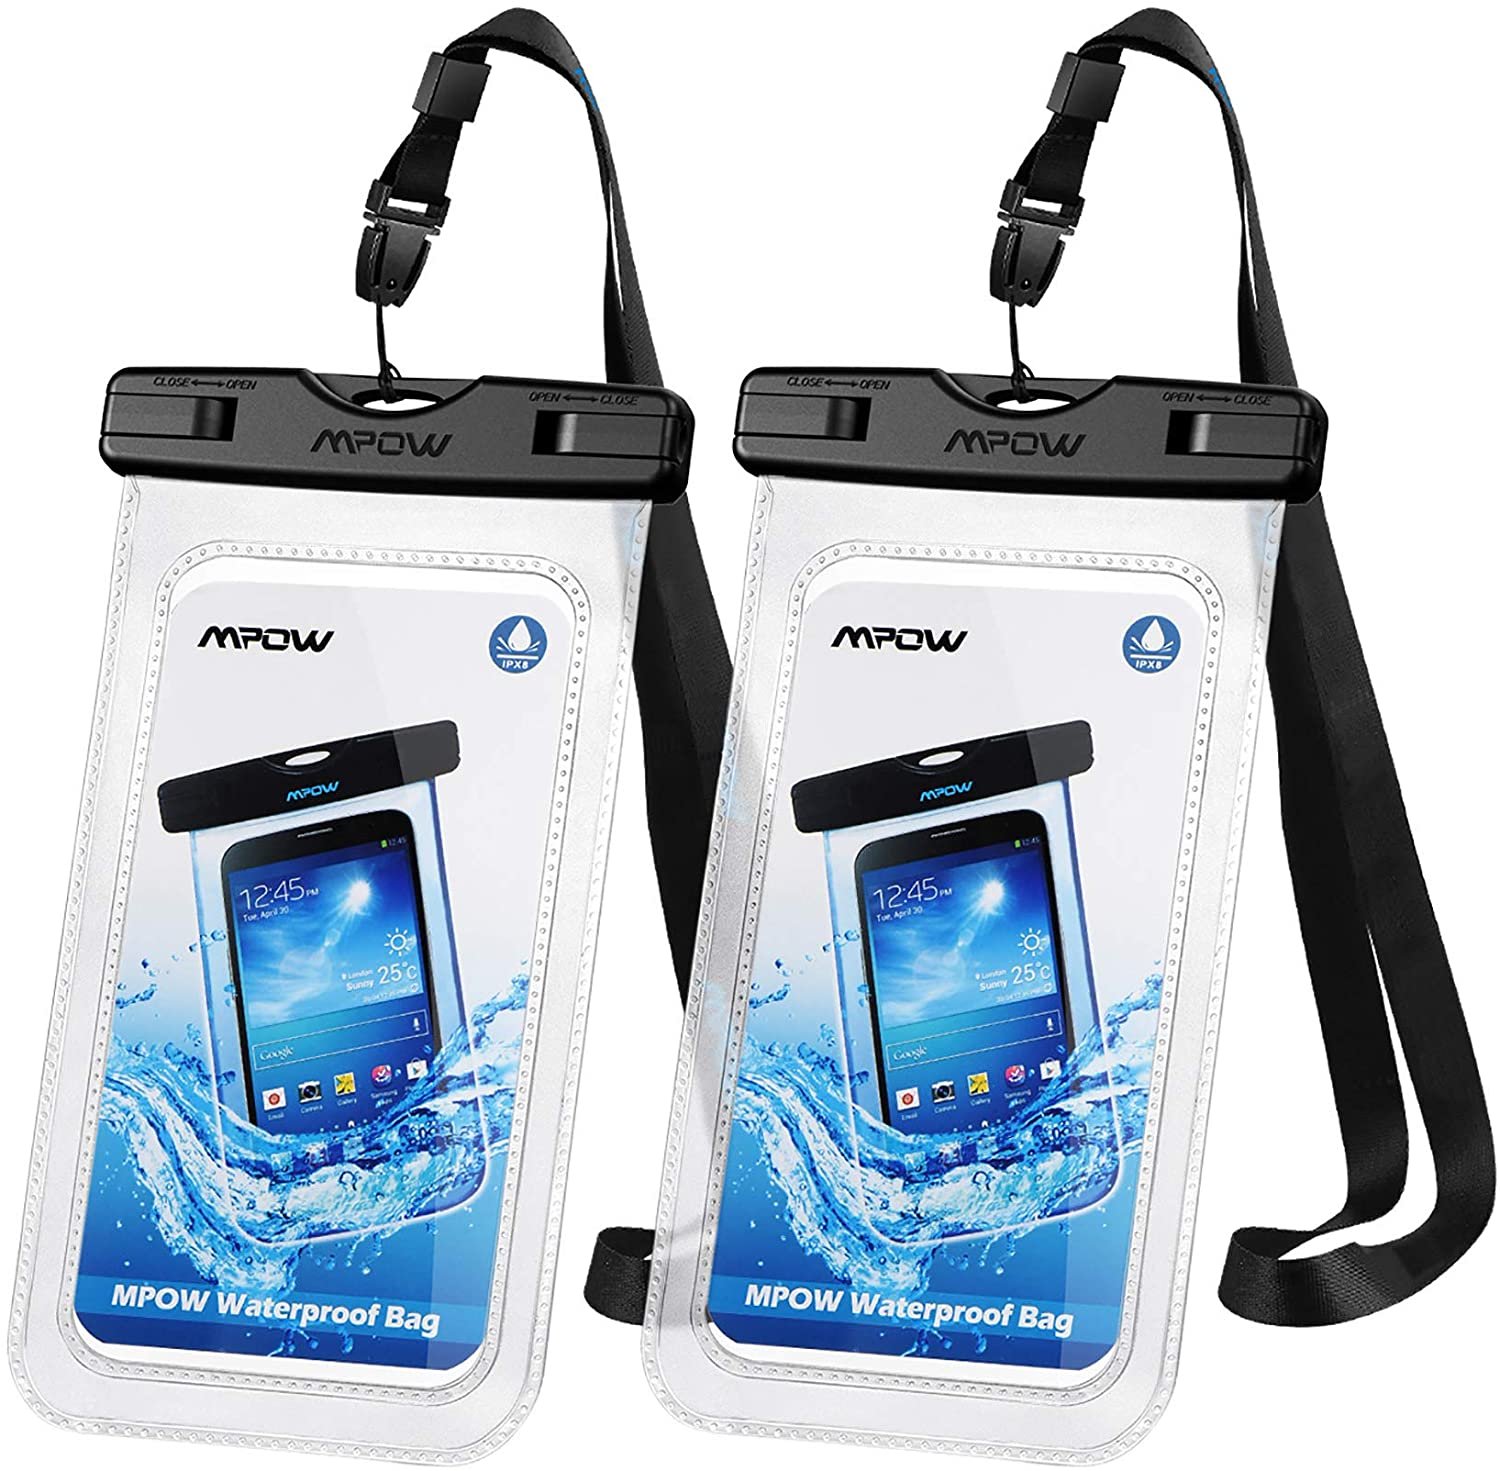 Mpow phone waterproof case photography, best gifts for travelers